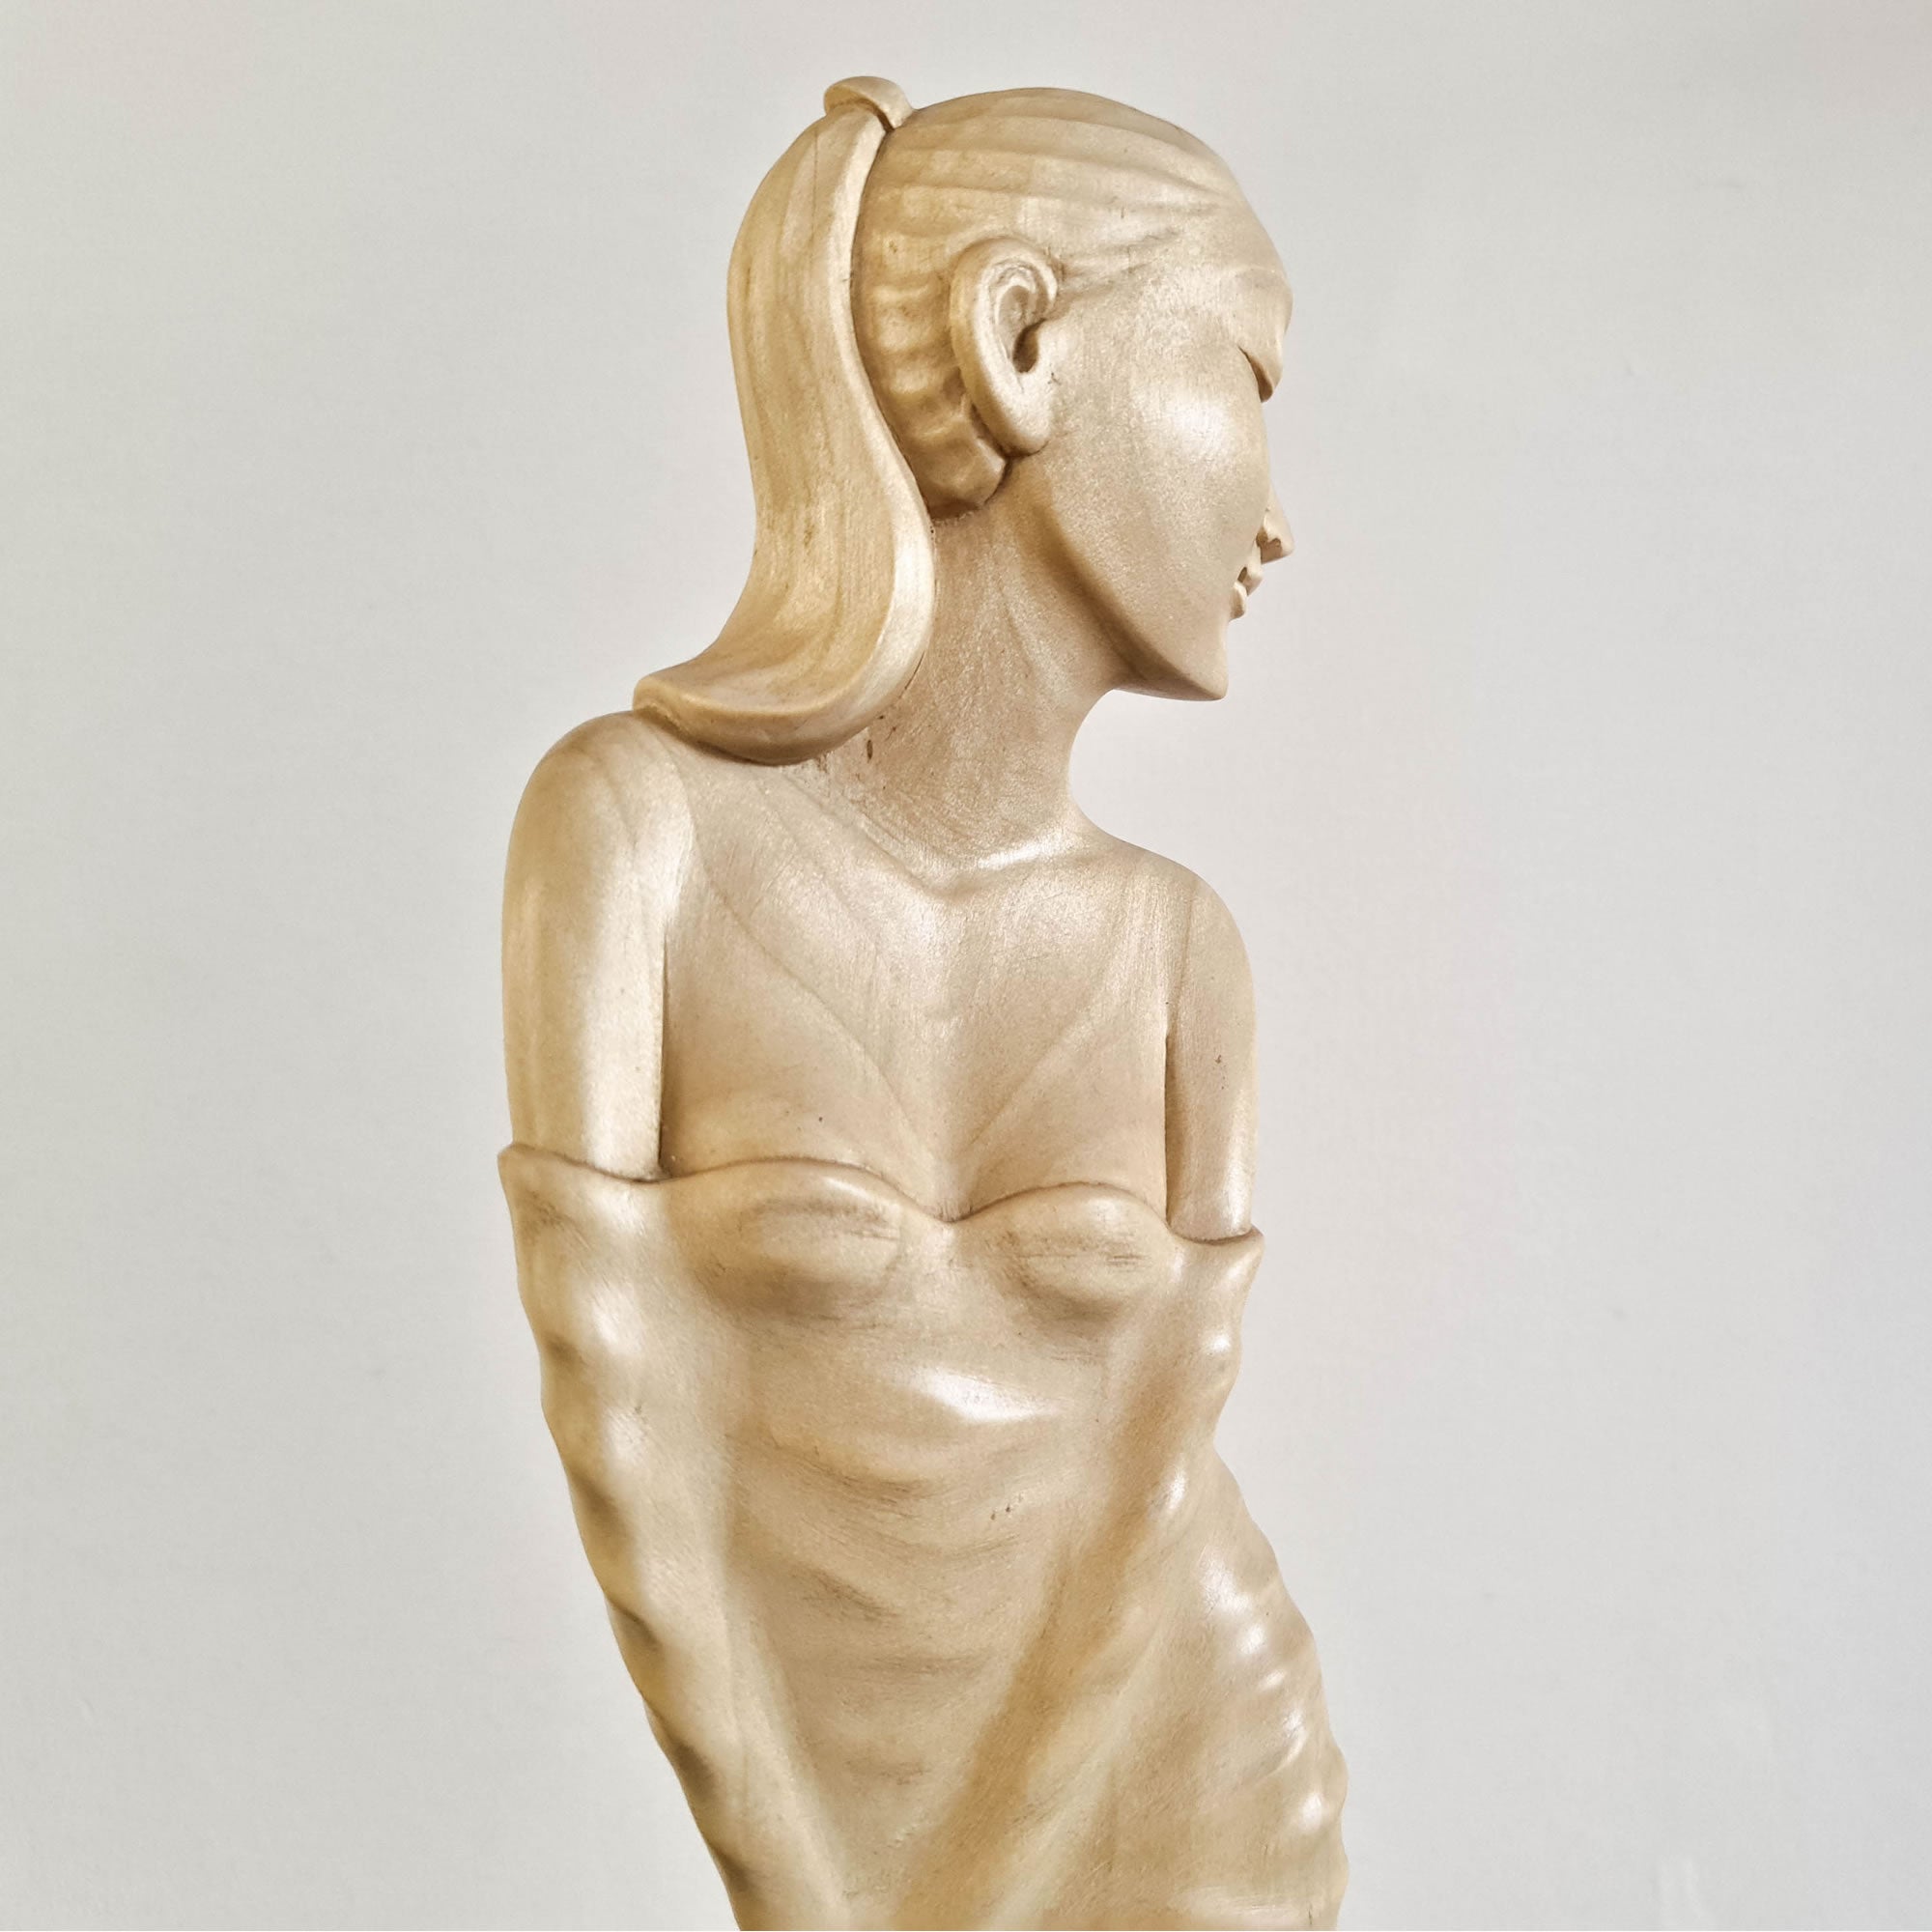 "Lady Chatterley" is a tale of repression, lust, and sexual liberation set in post-World War I France. This beautiful hand-carved sculpture has been hand-crafted by our skilled carvers using the rarest tulip white wood. Its intricate carving is detailed to perfection and is a true masterpiece to grace any interior space. It certainly can be used as a unique gift for a loved one to express your deeper love.